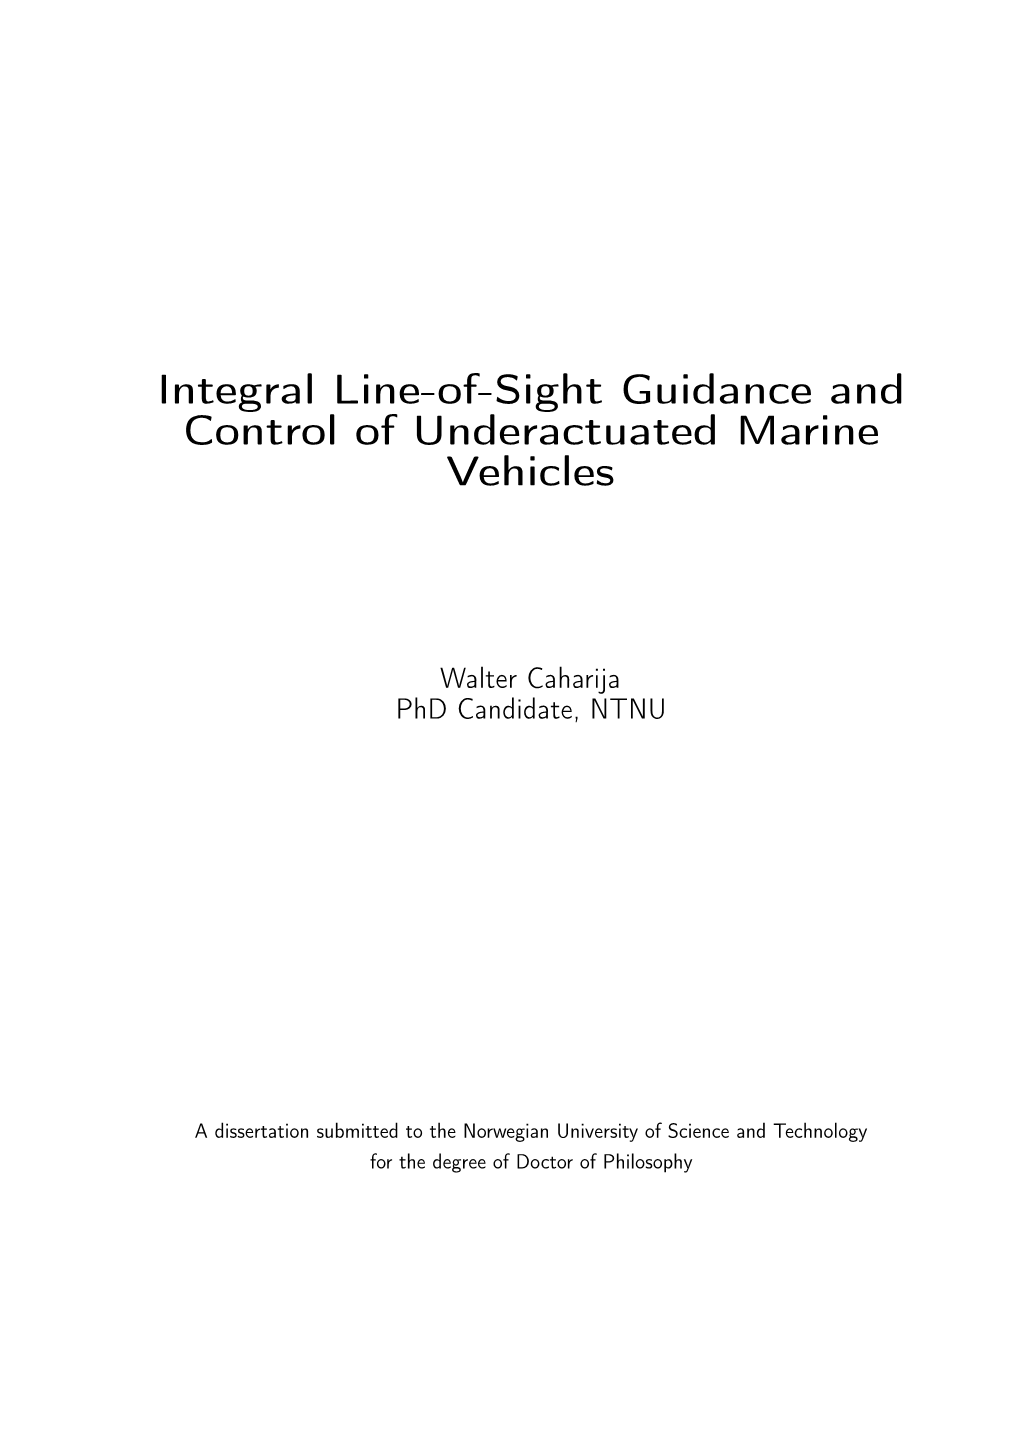 Integral Line-Of-Sight Guidance and Control of Underactuated Marine Vehicles